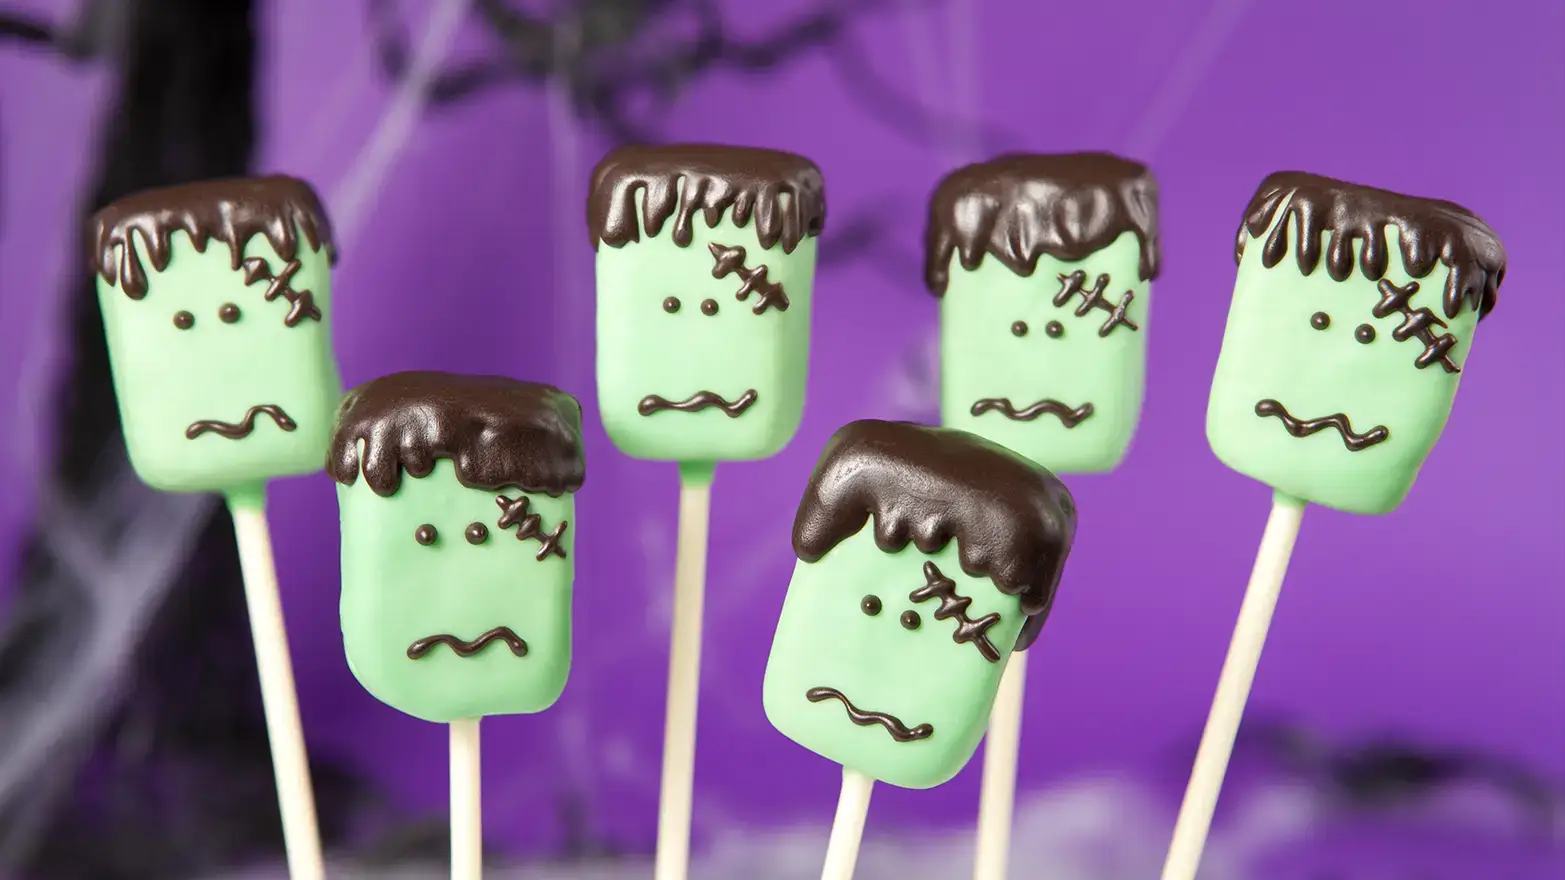 Chocolate dipped marshmallows decorated to look like Frankenstein
